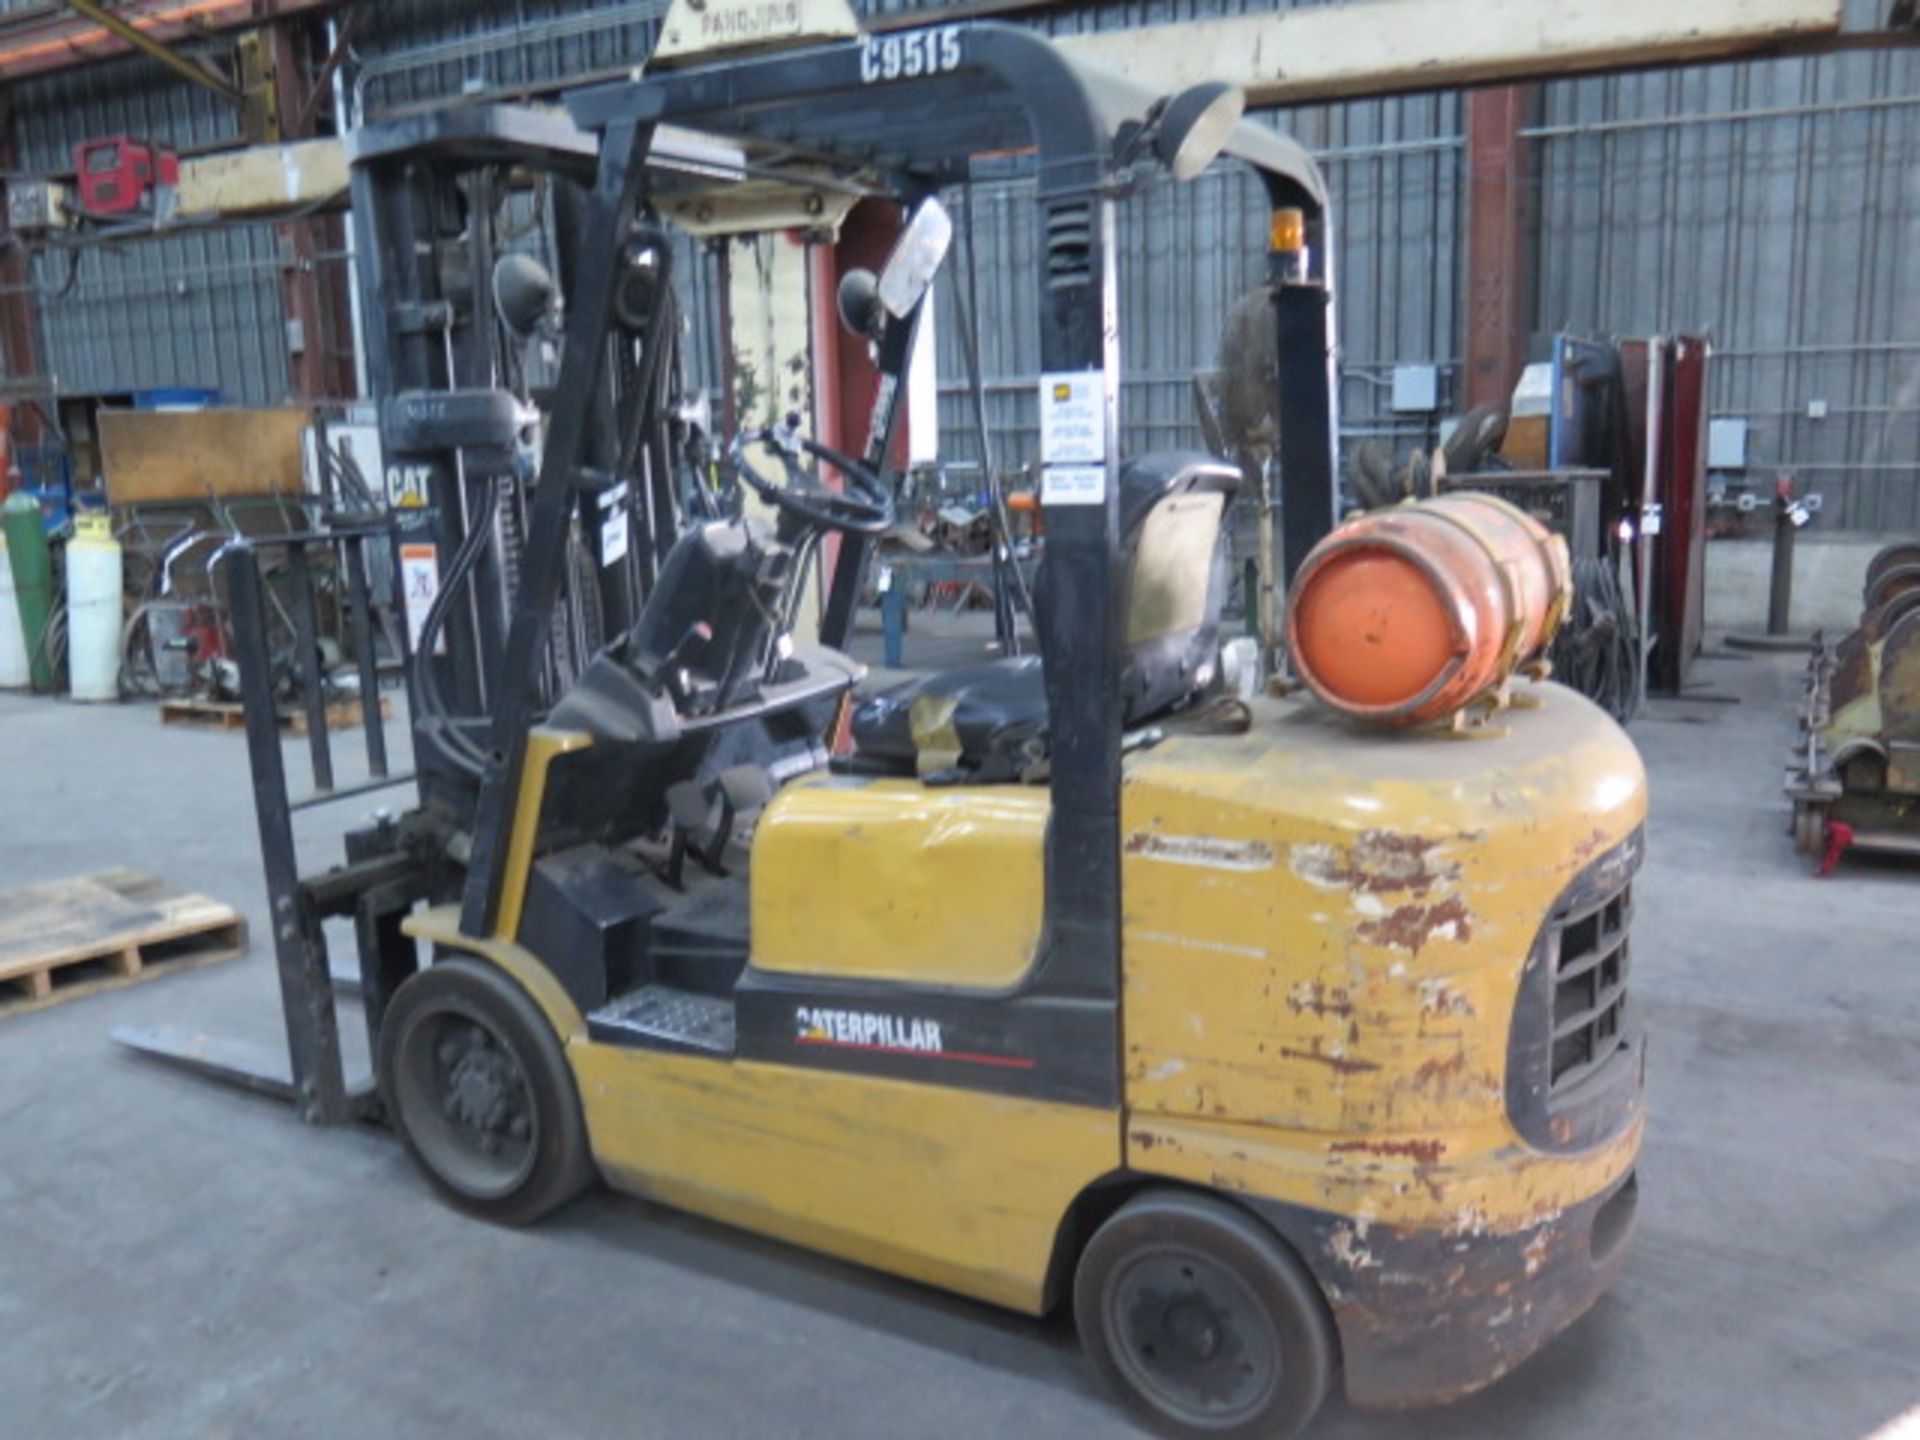 Caterpillar GC30K 3120 Lb Cap LPG Forklift s/n AT83C01757 w/ 3-Stage, 186” Lift Height, SOLD AS IS - Image 3 of 18